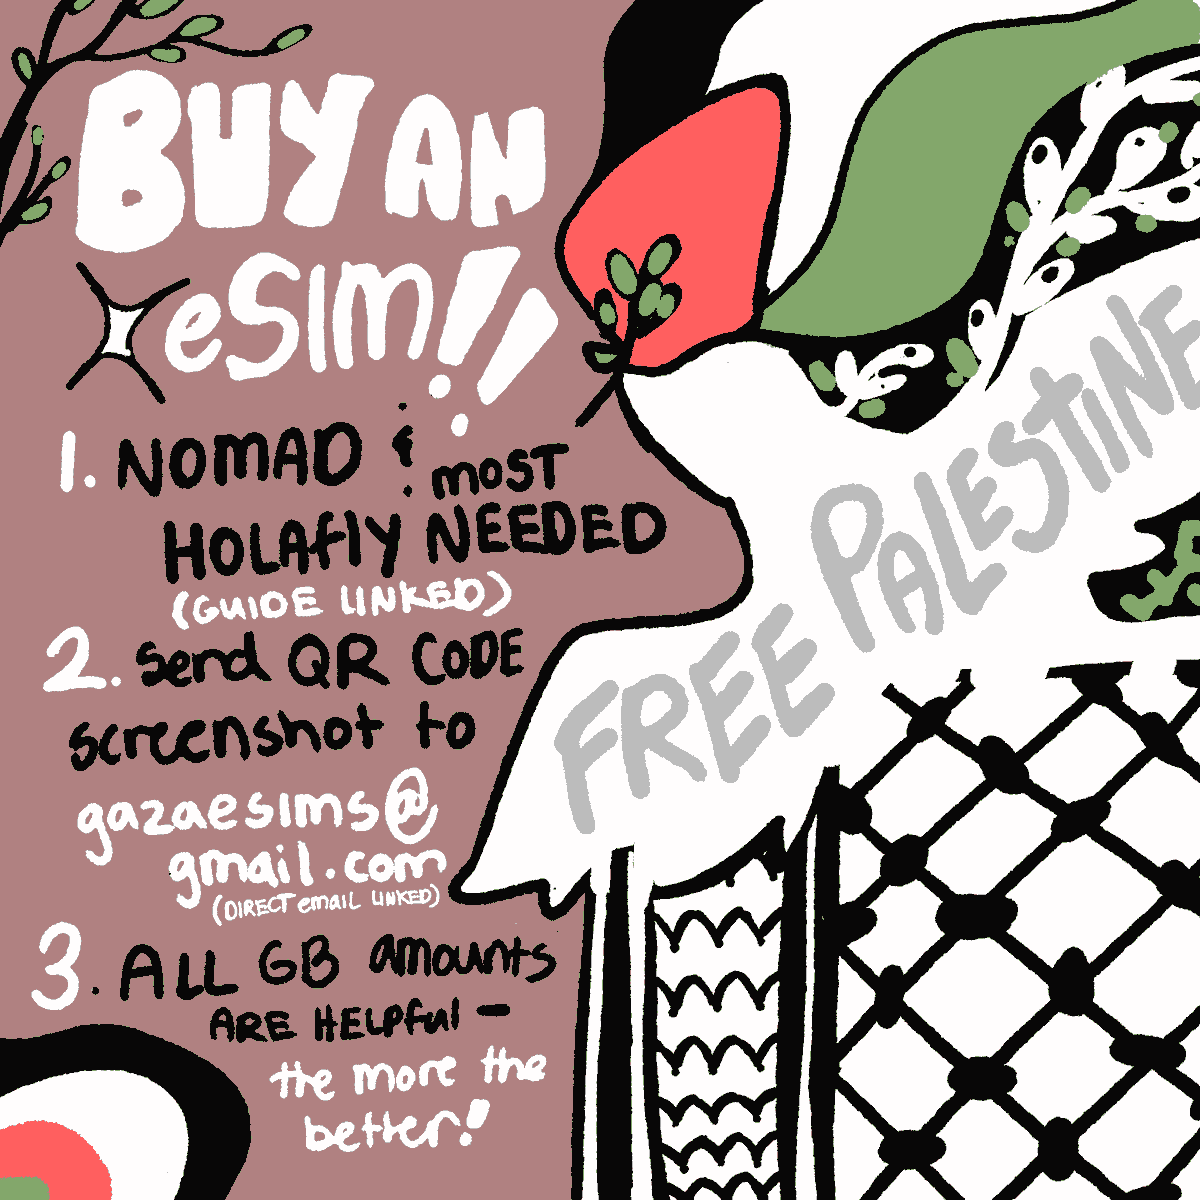 eSIMs are still needed! 🍉 instructions can be found on gazaesims.com (both on site and their linked zine) and then sent to gazaesims@gmail.com - NOMAD and Holafly are most requested as of 1/22